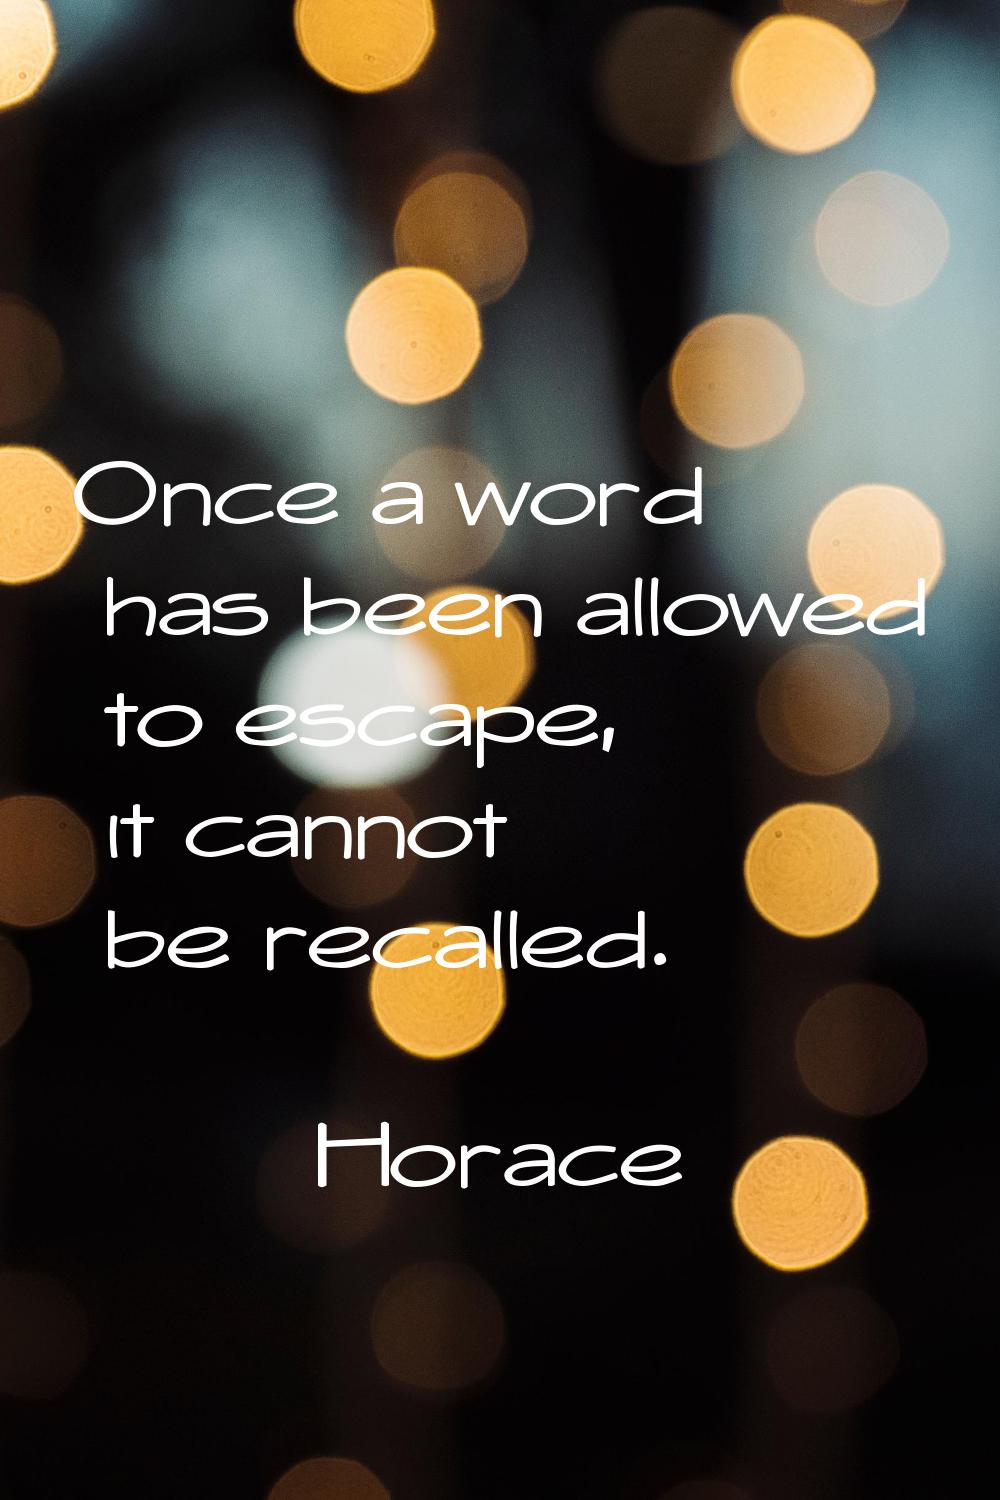 Once a word has been allowed to escape, it cannot be recalled.